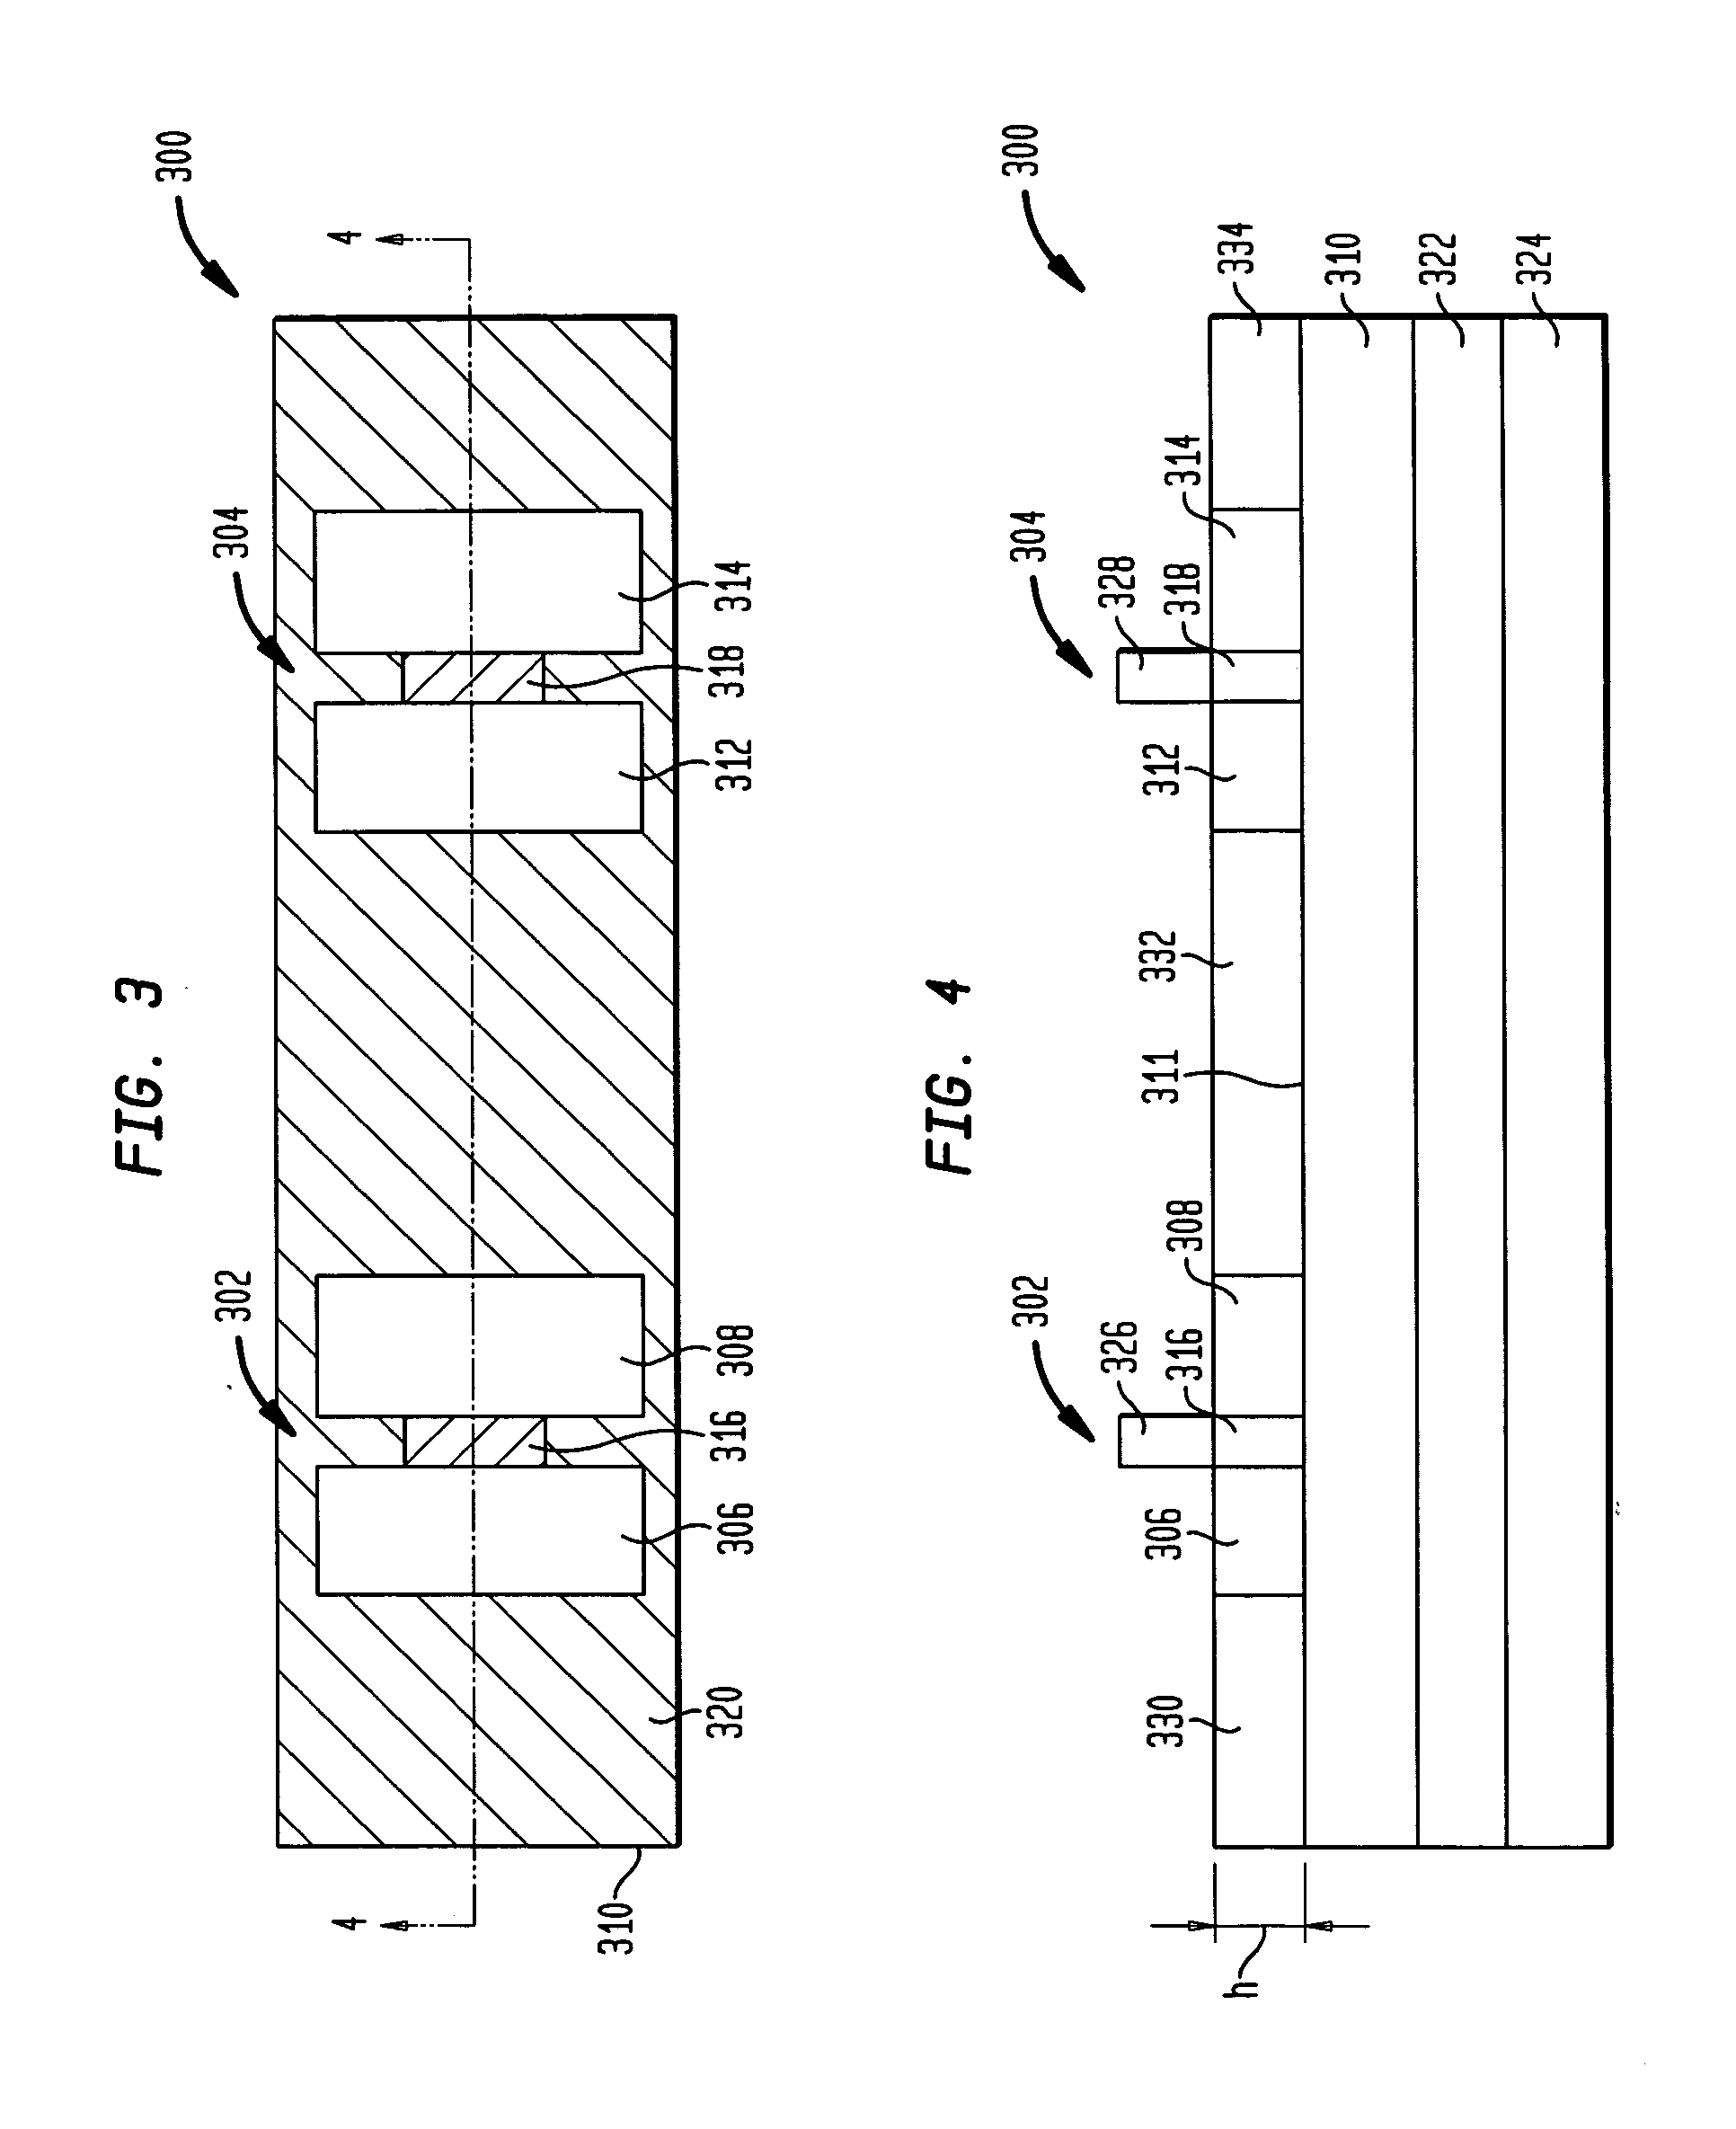 Devices having patterned regions of polycrystalline organic semiconductors, and methods of making the same